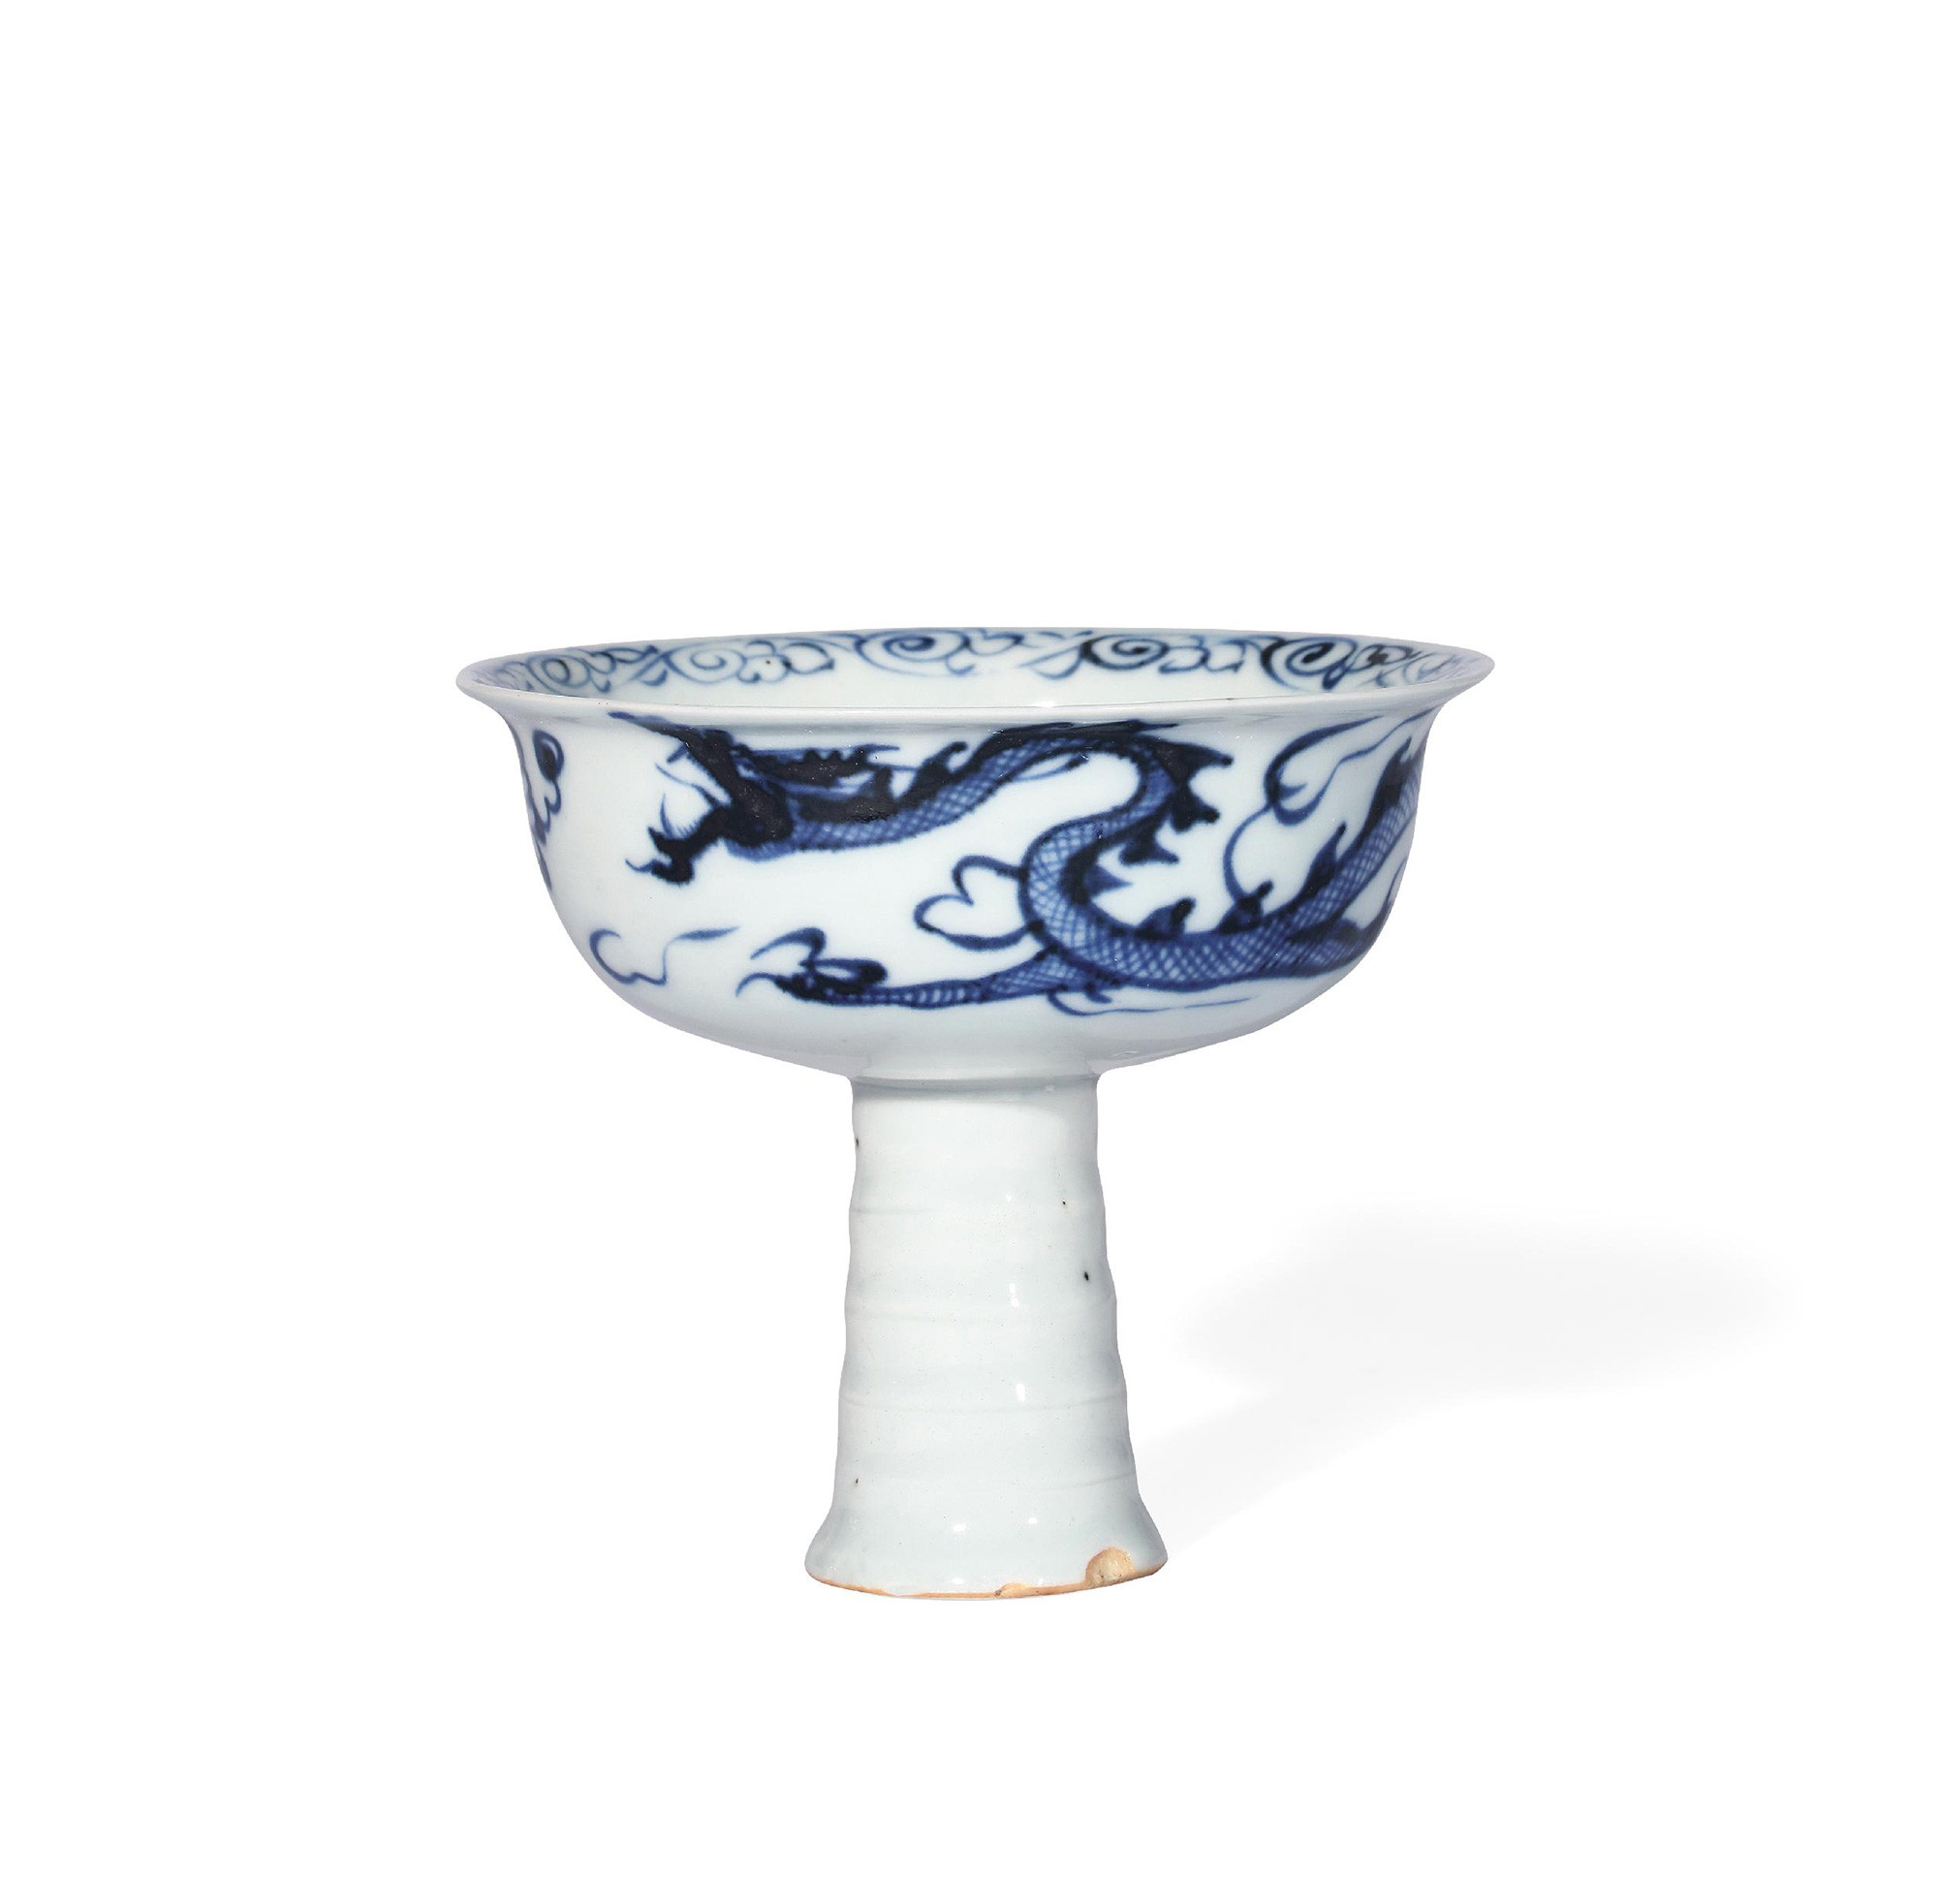 A VERY RARE BLUE AND WHITE STEM CUP WITH MOULDED DRANGON DESIGN